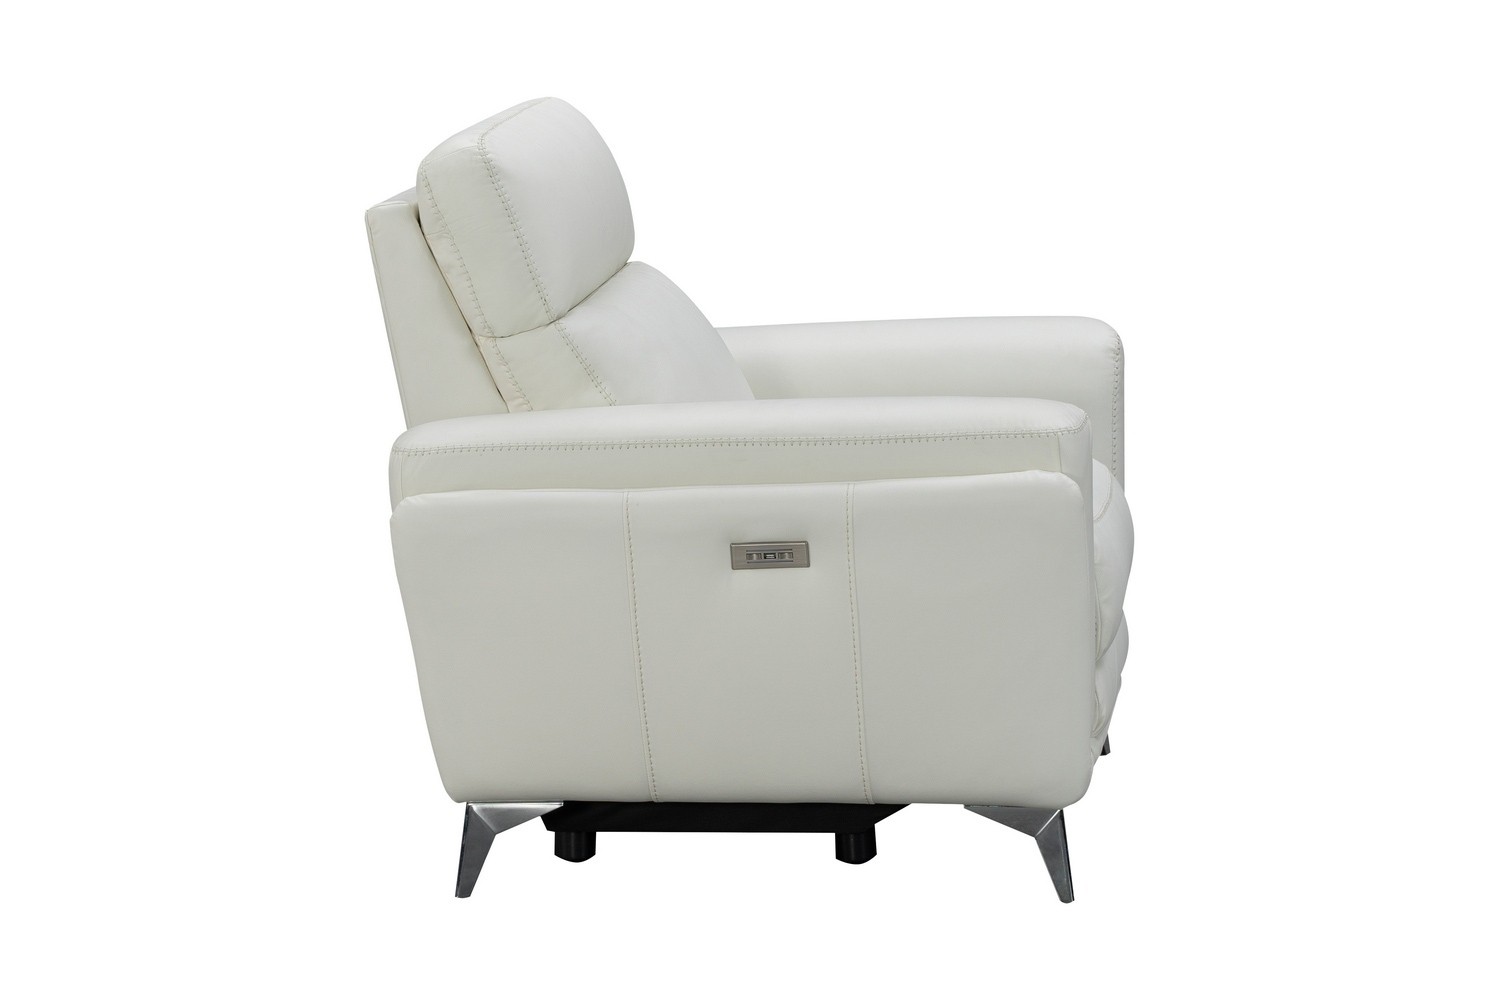 Barcalounger Cameron Power Recliner Chair with Power Head Rest - Enzo Winter White/Leather Match